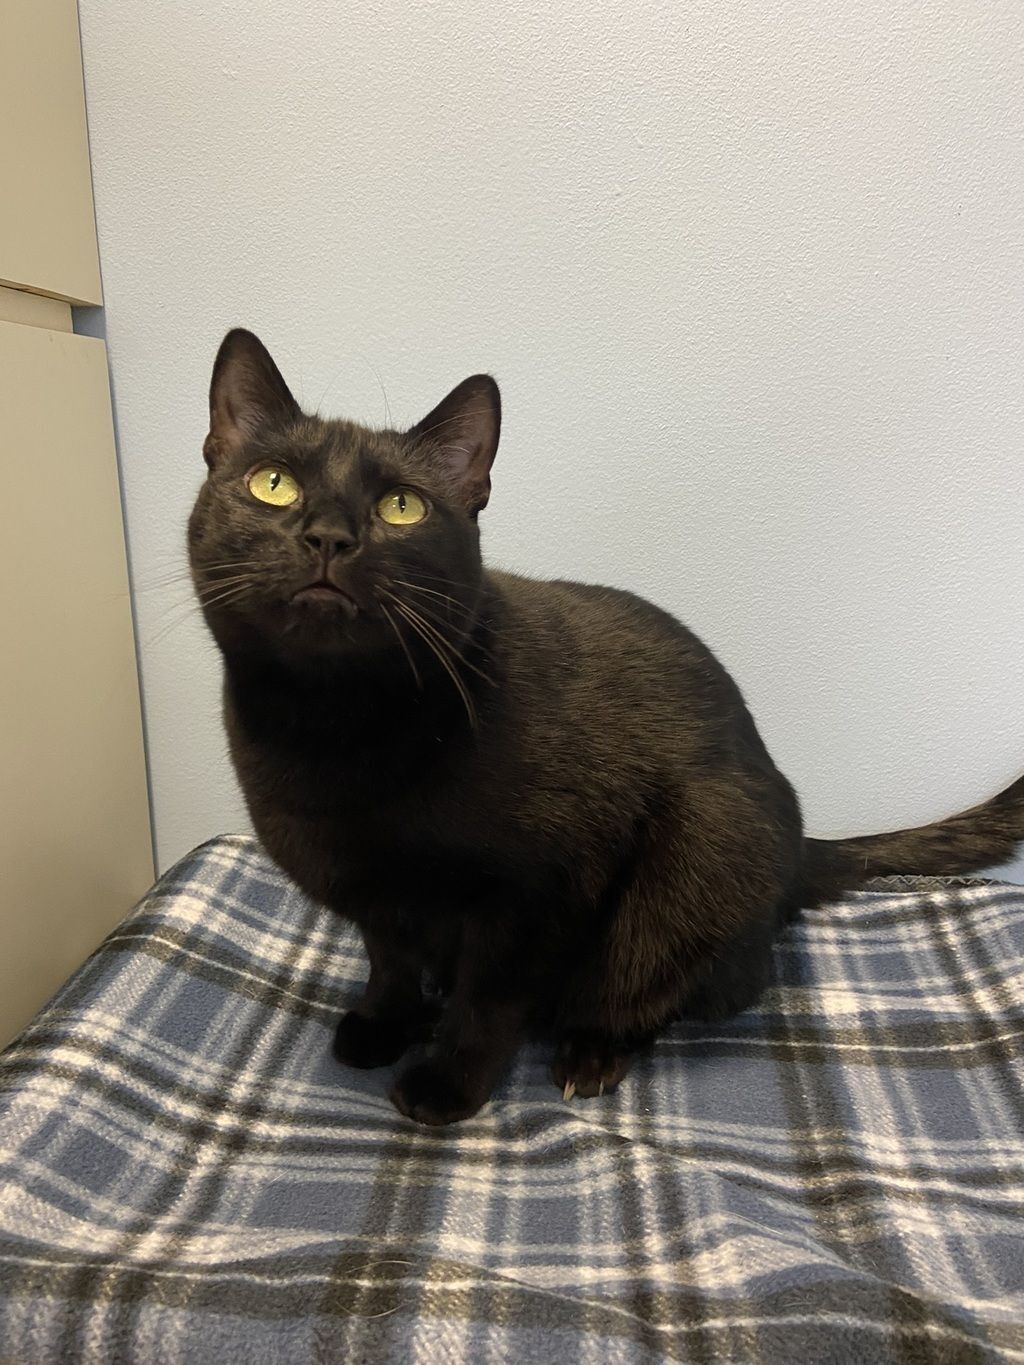 This black cat has waited 500 days in a Bergen shelter. Viral video may help her find home (NorthJersey.com)